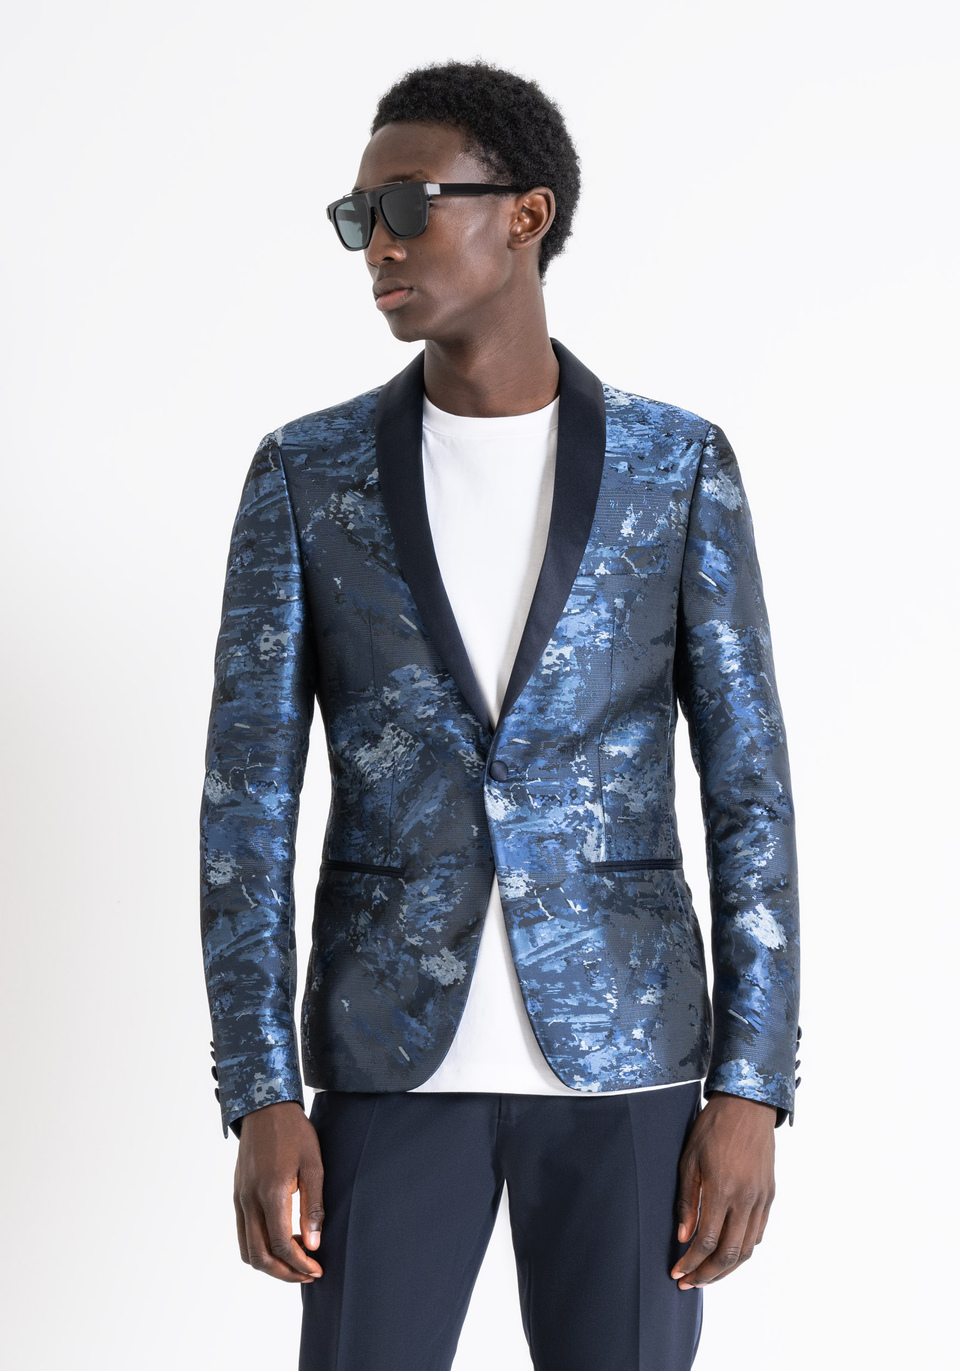 SLIM FIT "ROXANNE" JACKET IN JACQUARD FABRIC WITH SATIN CONTRAST - Antony Morato Online Shop